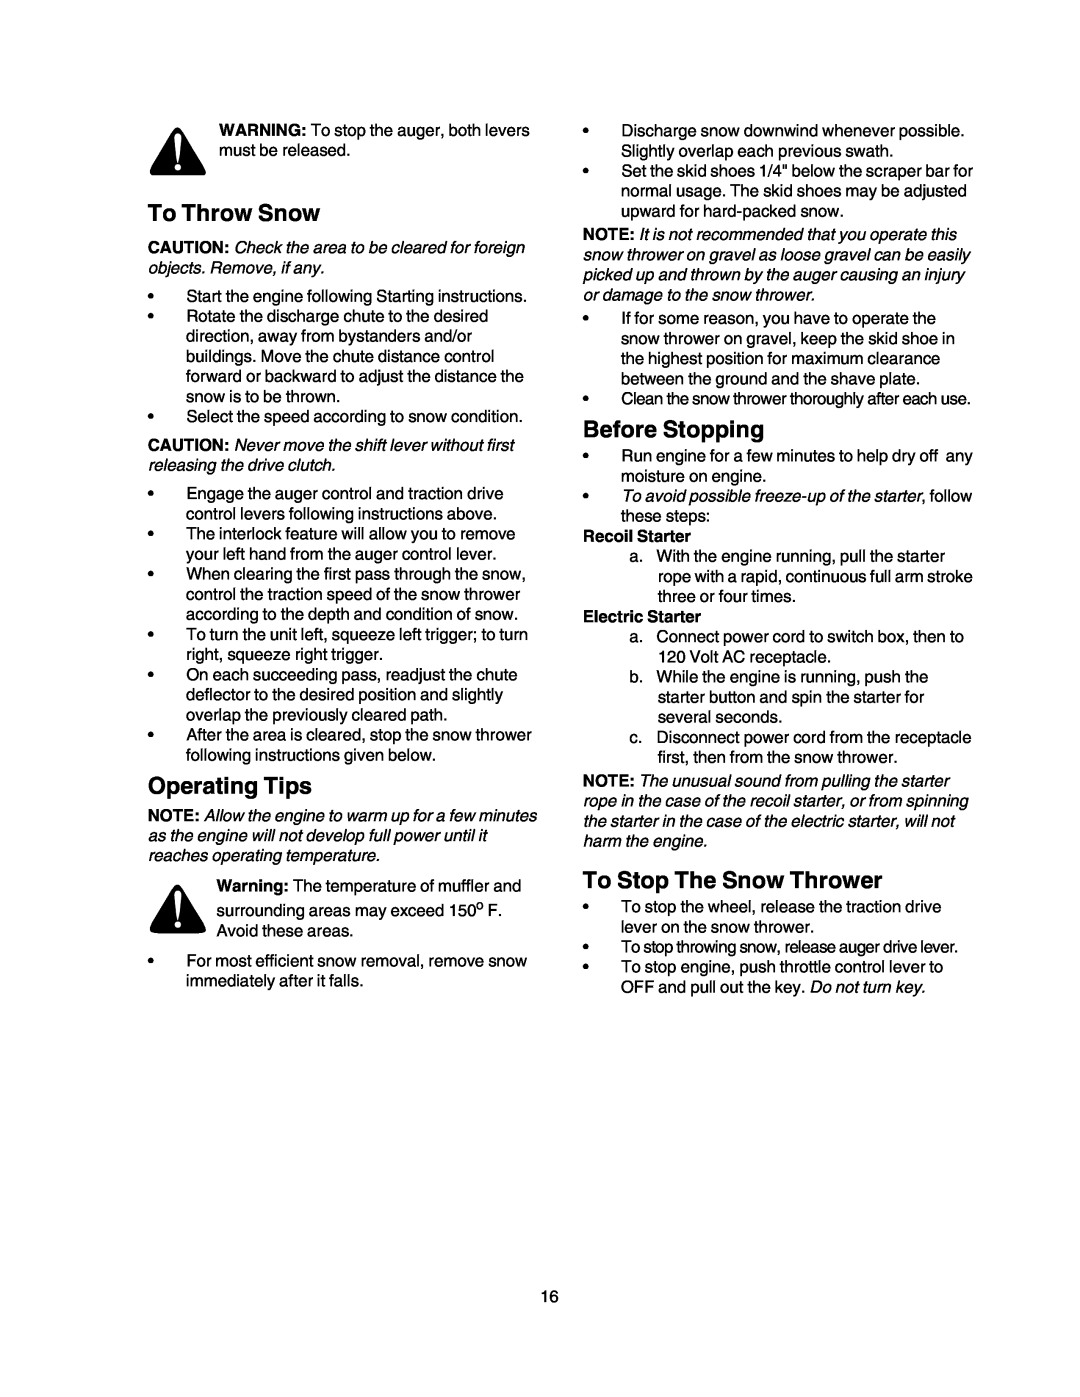 Craftsman 247.88853 owner manual To Throw Snow, Operating Tips, Before Stopping, To Stop The Snow Thrower, Recoil Starter 